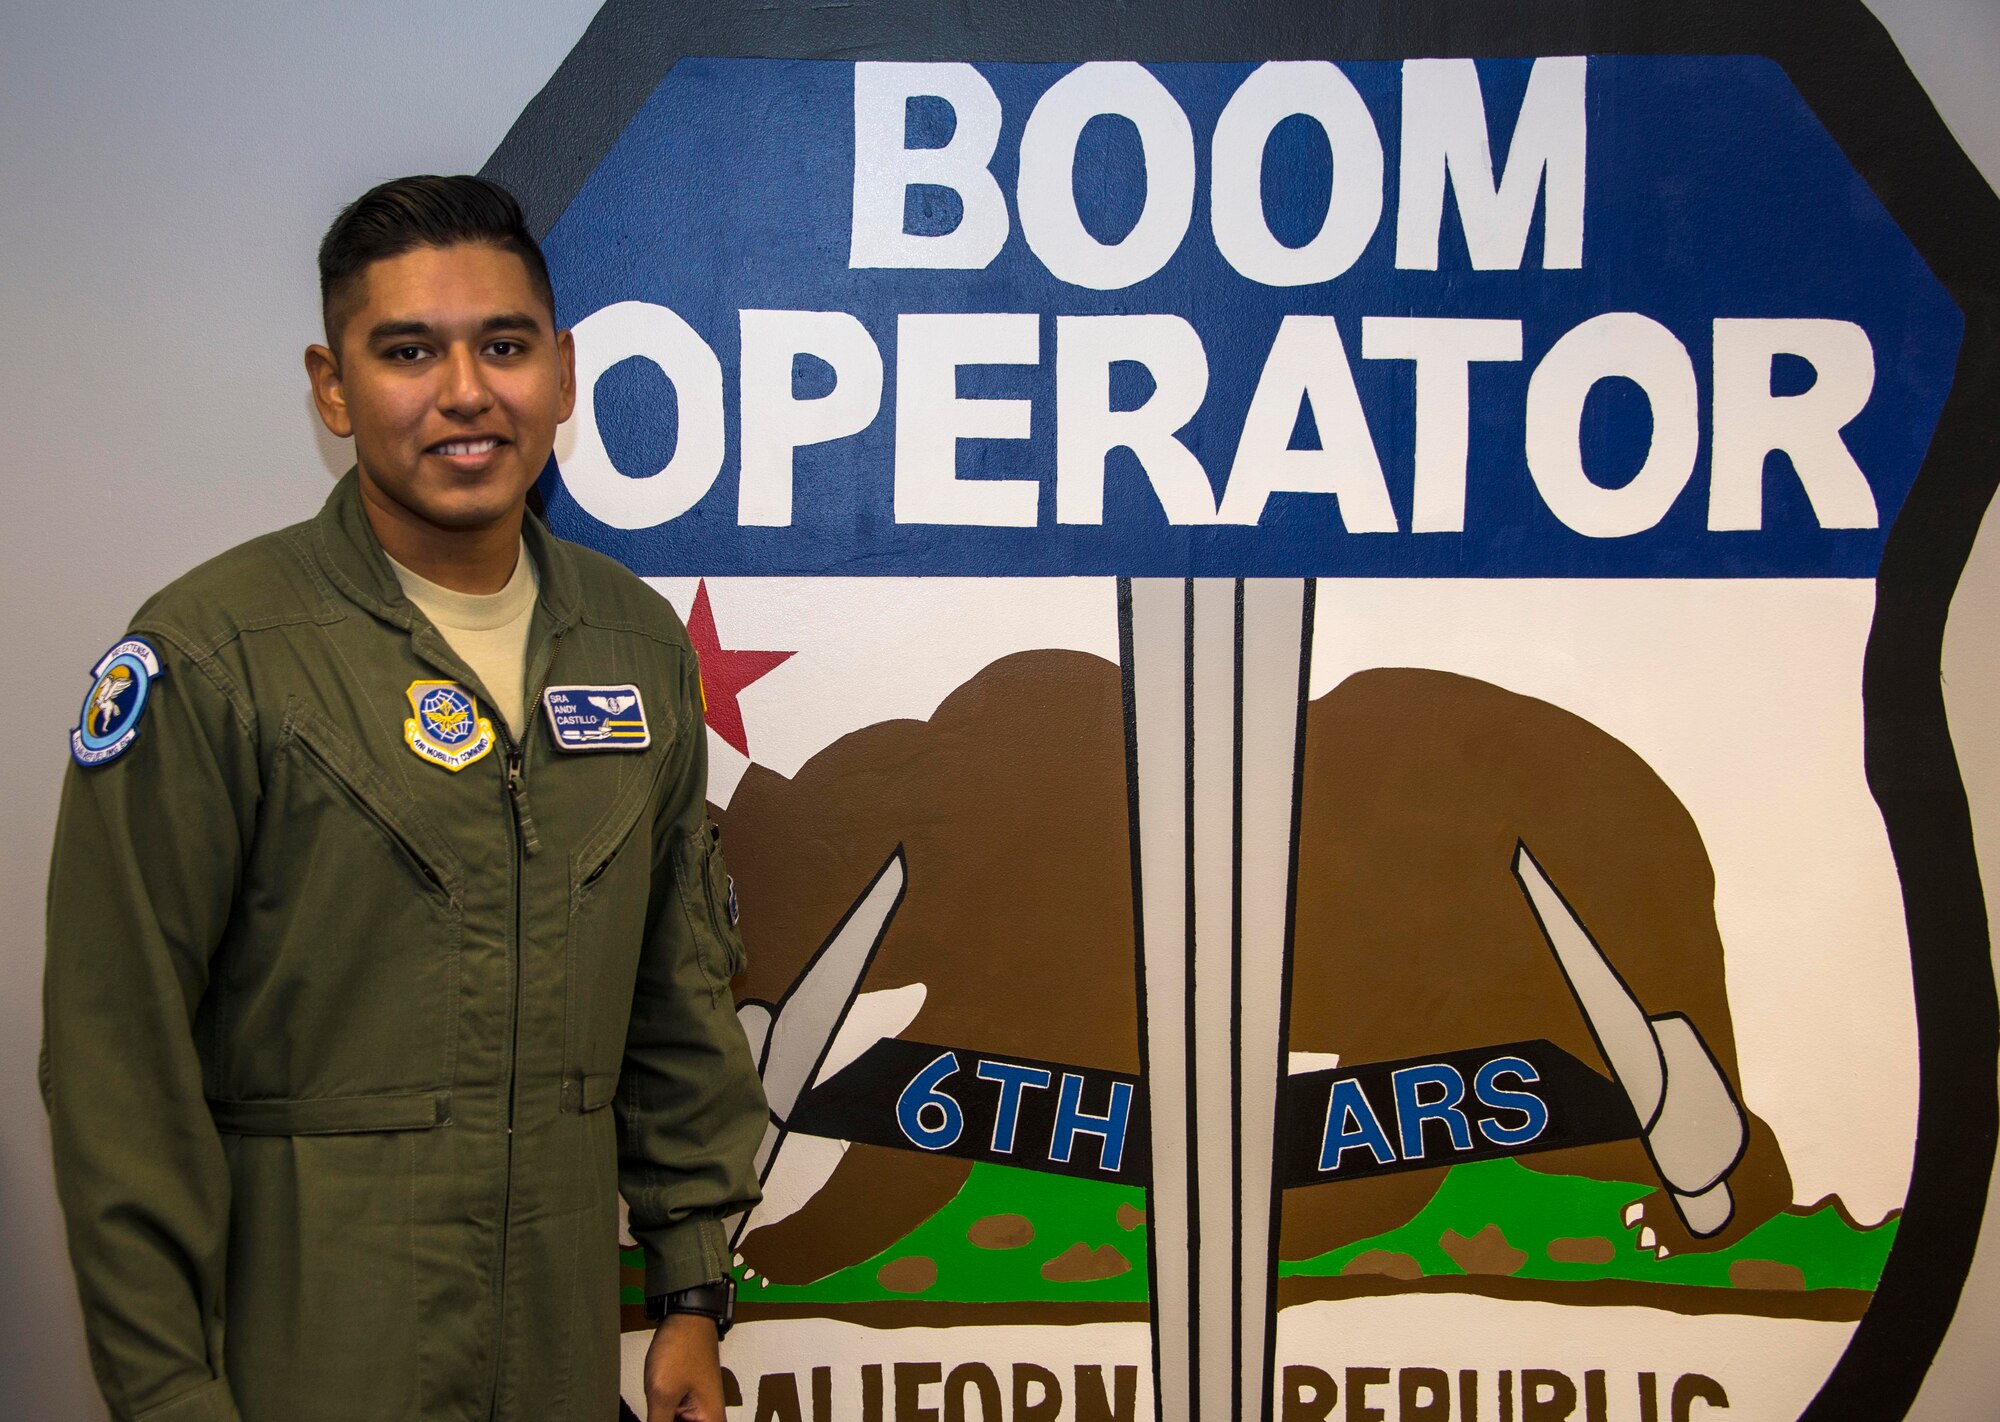 Senior Airman Andres Castillo, 6th Air Refueling Squadron boom operator, poses for a photo within his squadron at Travis Air Force Base, Calif., July 20, 2016. (U.S. Air Force photo by Staff Sgt. Charles Rivezzo)